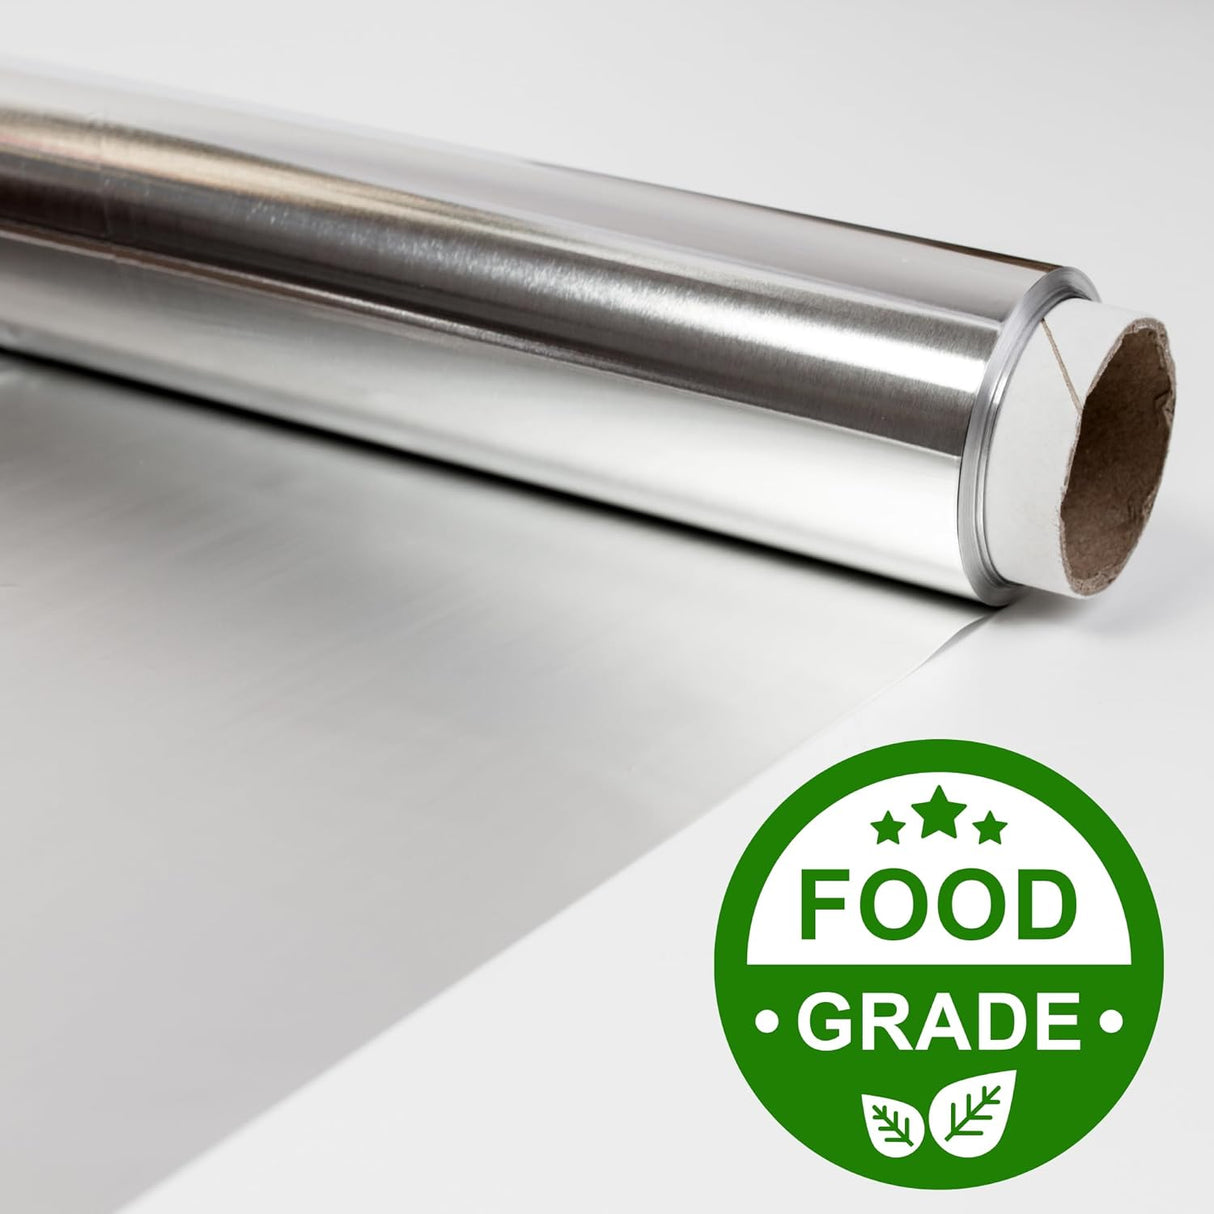 Singhal Aluminum Foil 54 Meters, 11microns | Aluminium Silver Foil for Kitchen, Food Packing, Wrapping, Storing and Serving (9 Mtr x Pack of 6)